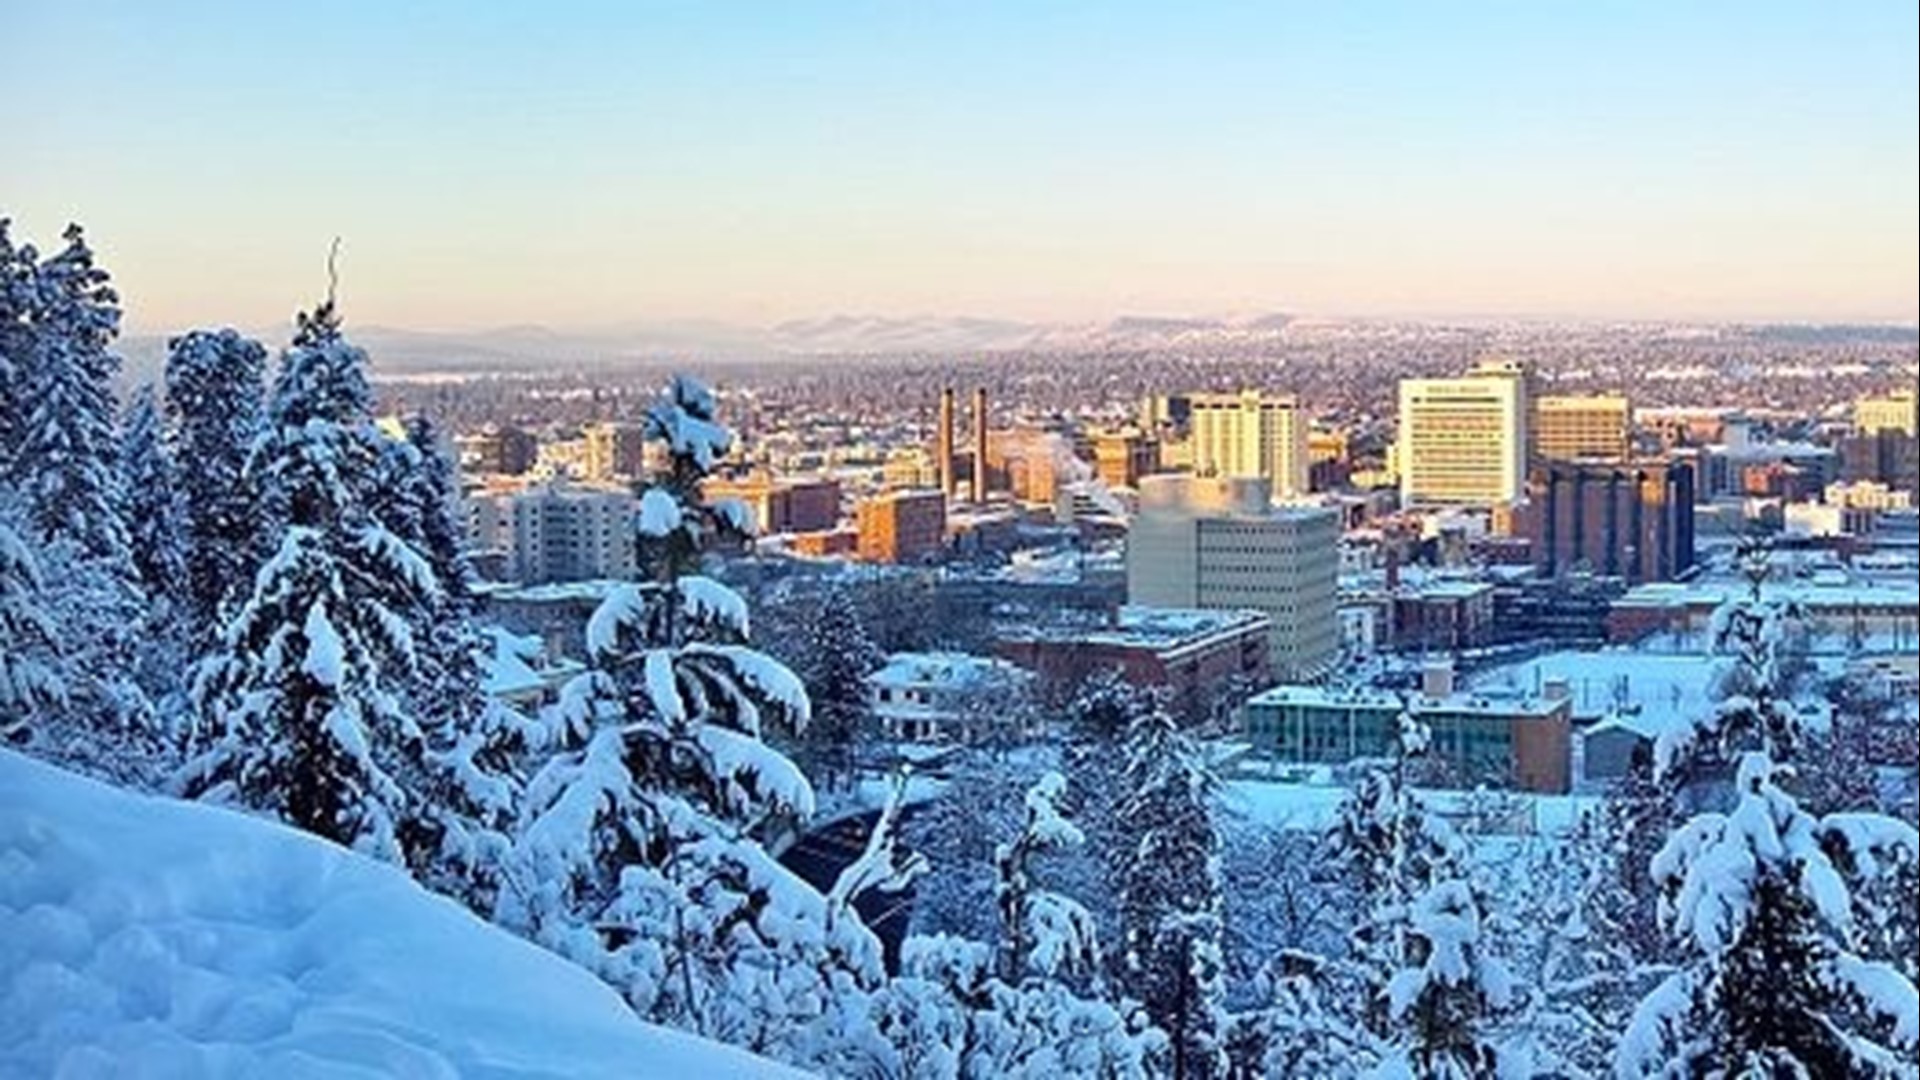 Spokane ranked 4th ‘most depressing' winter in country